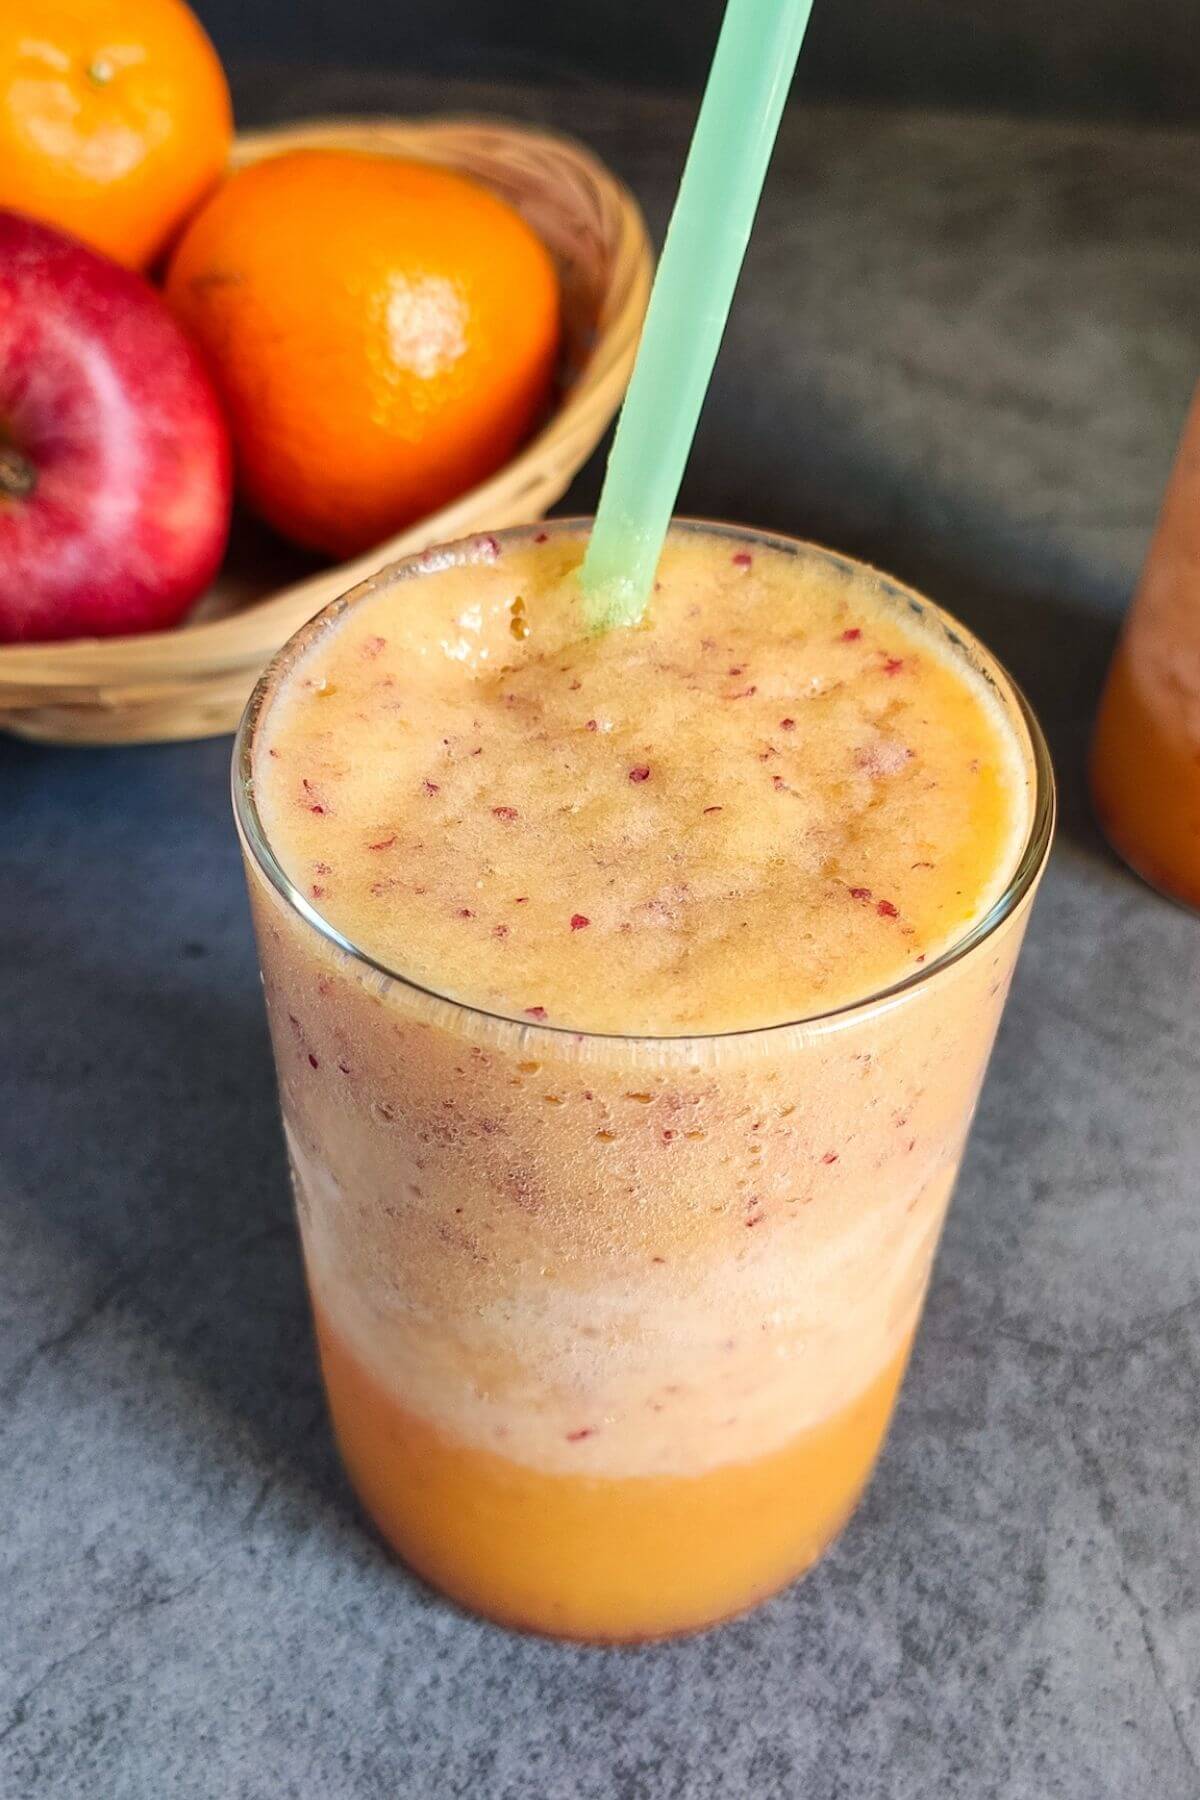 apple orange smoothie in a glass with straw and a basket of fruits.